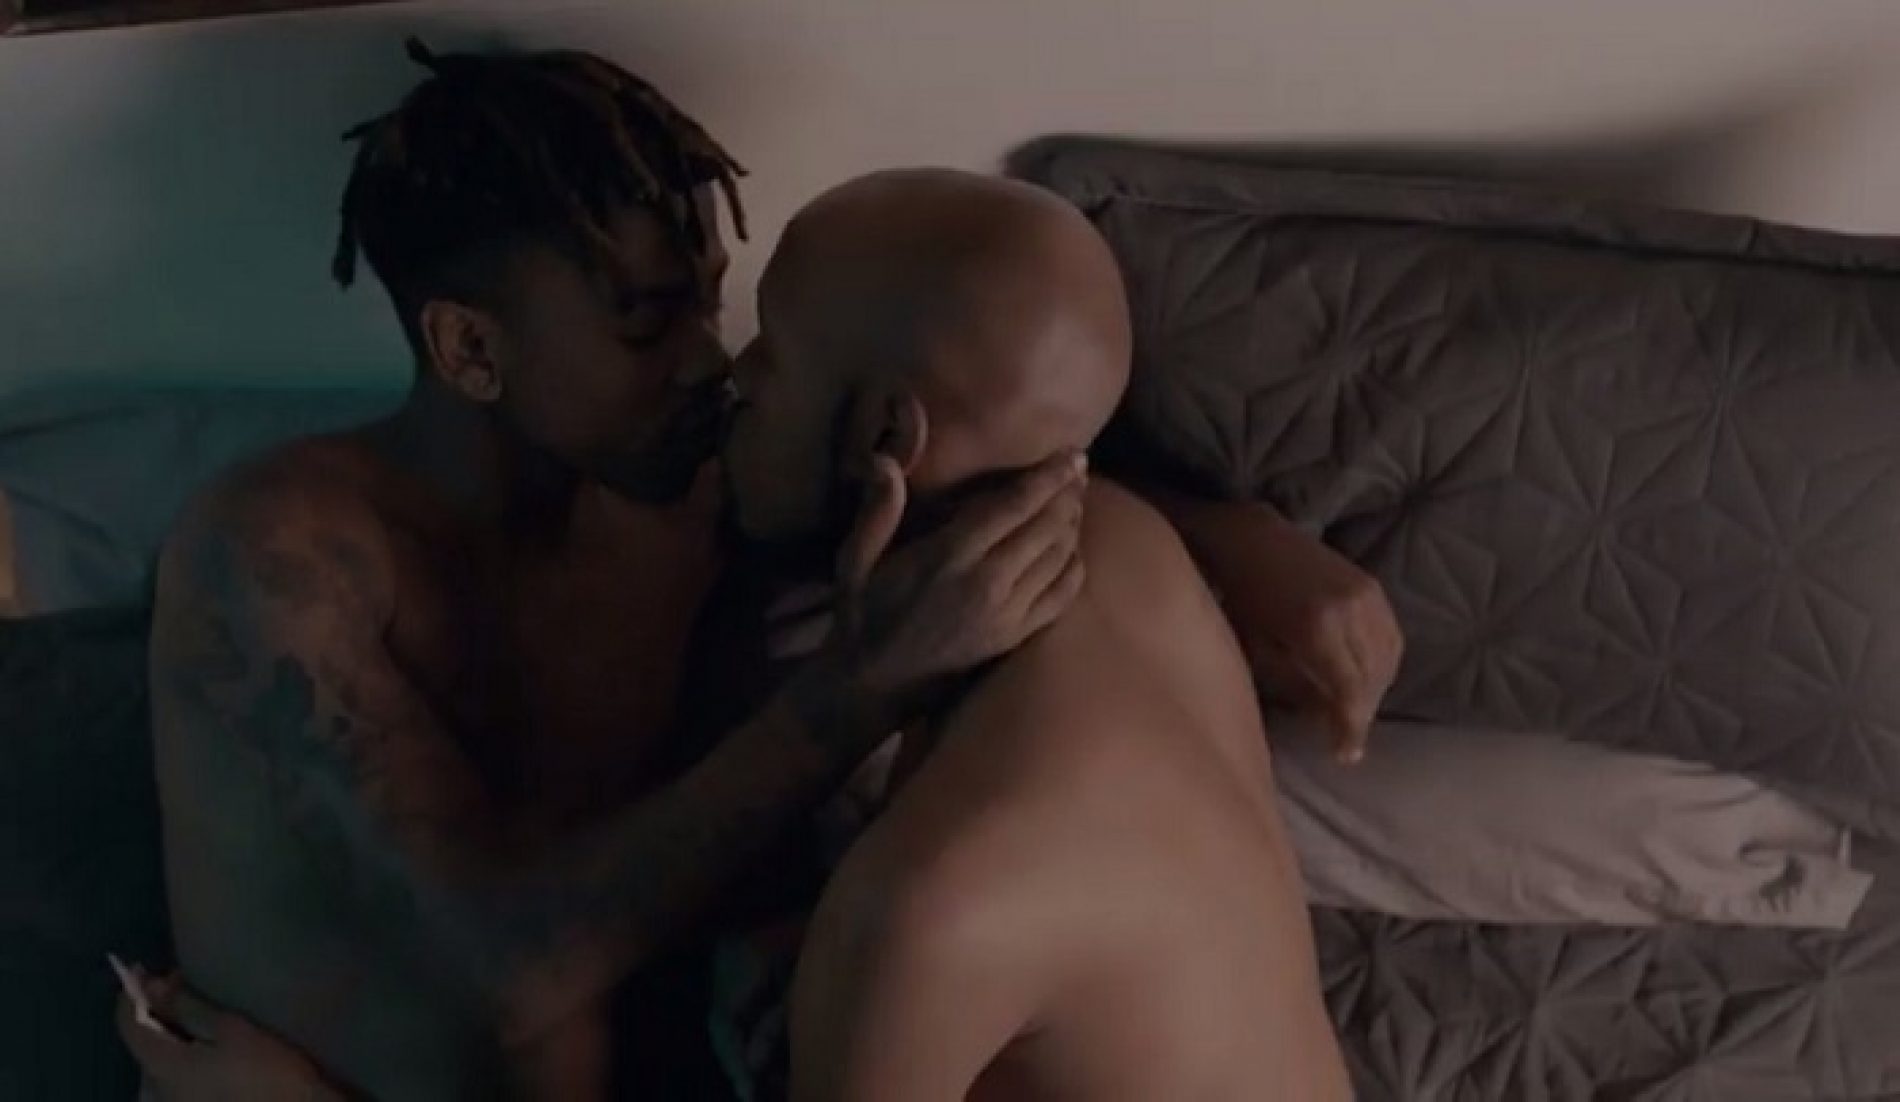 Is This The Most Gay Intimacy We’ve Gotten On African Television?